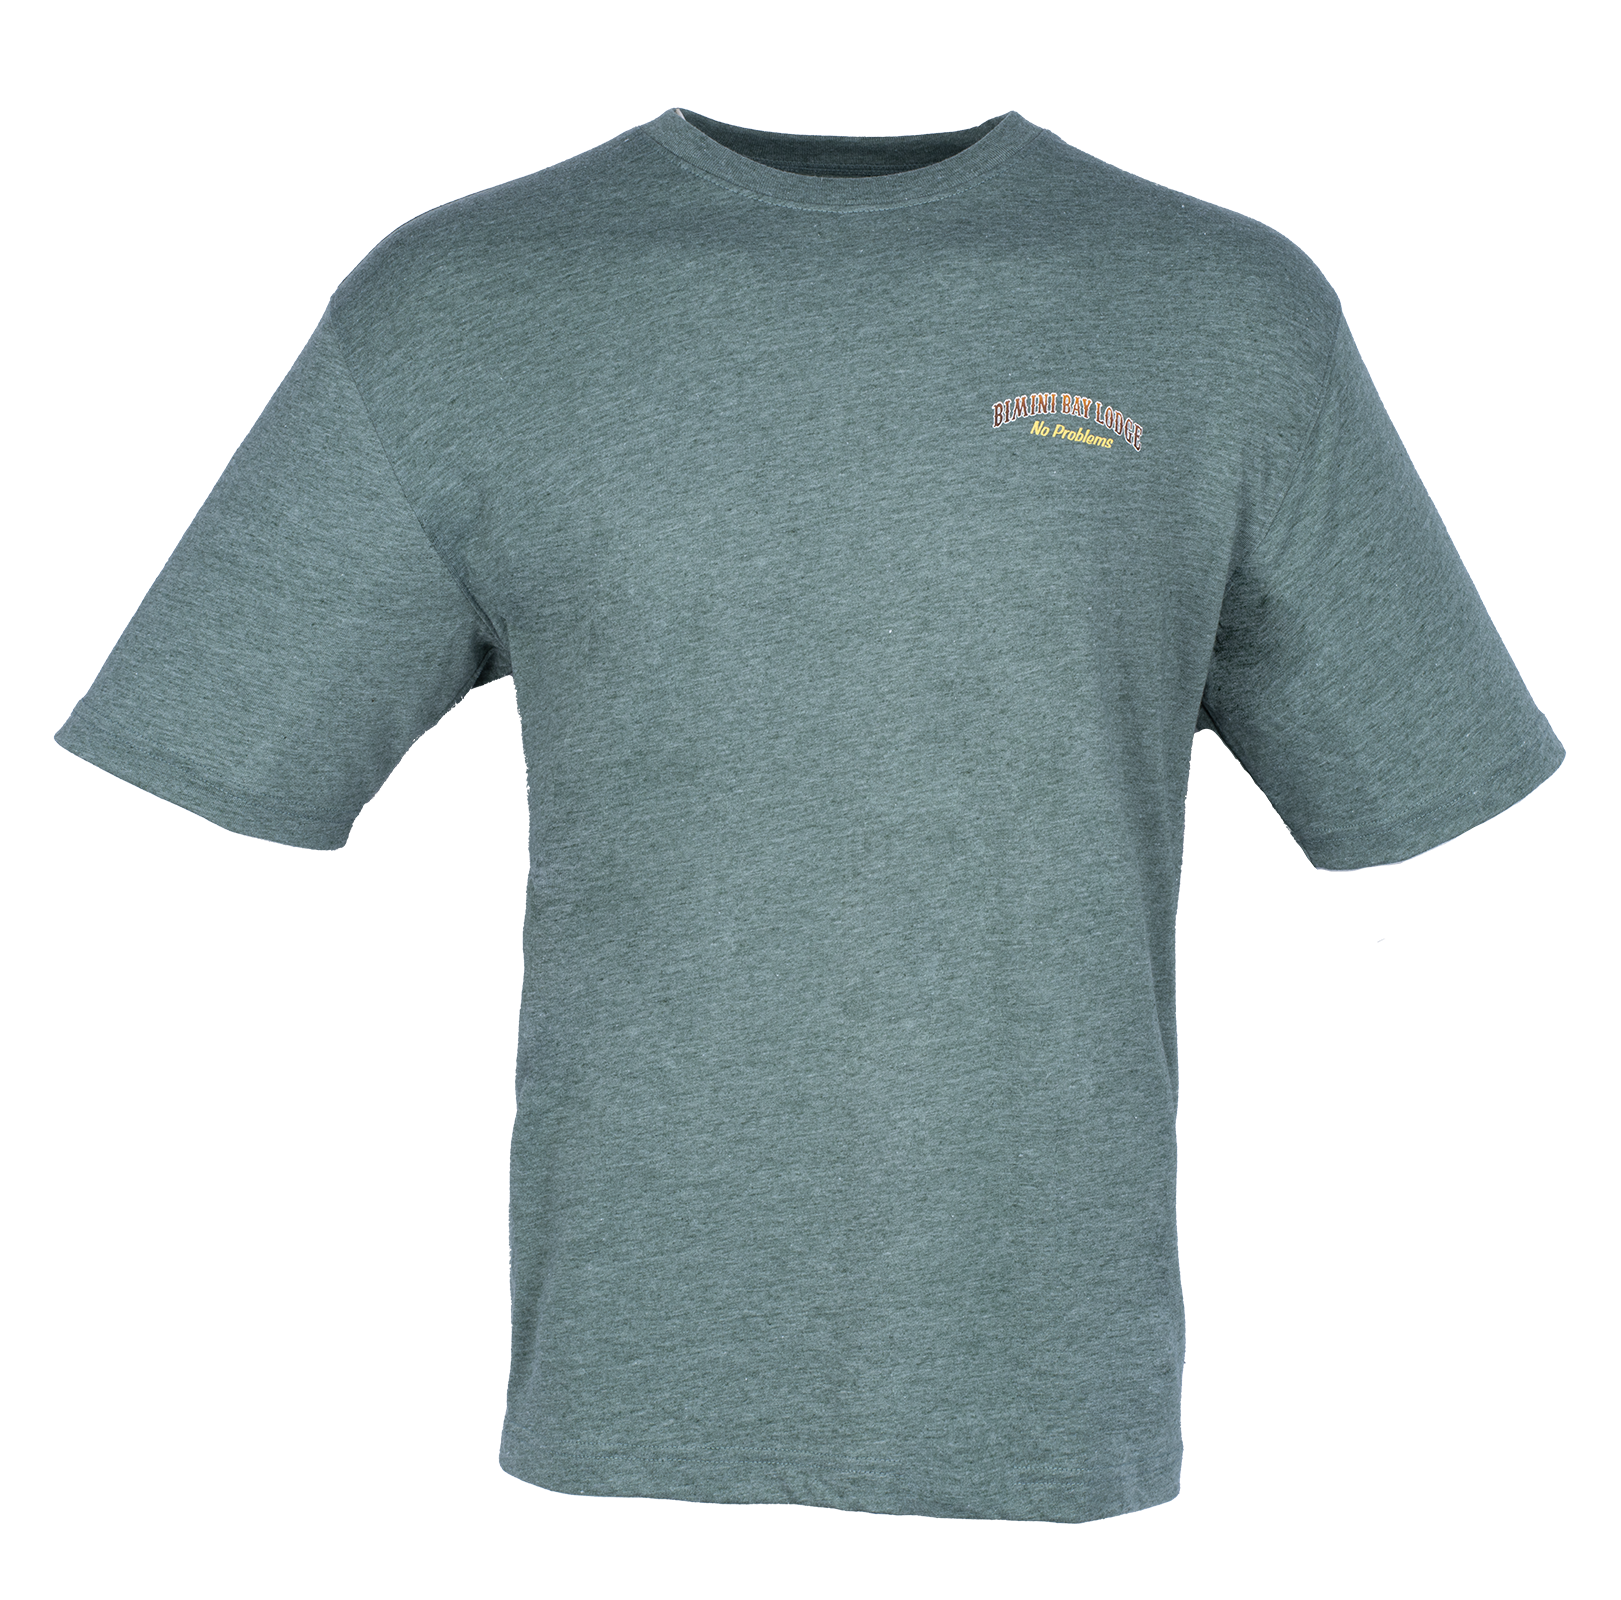 Classic Outfitter Short Sleeve Graphic Tee - No Problems